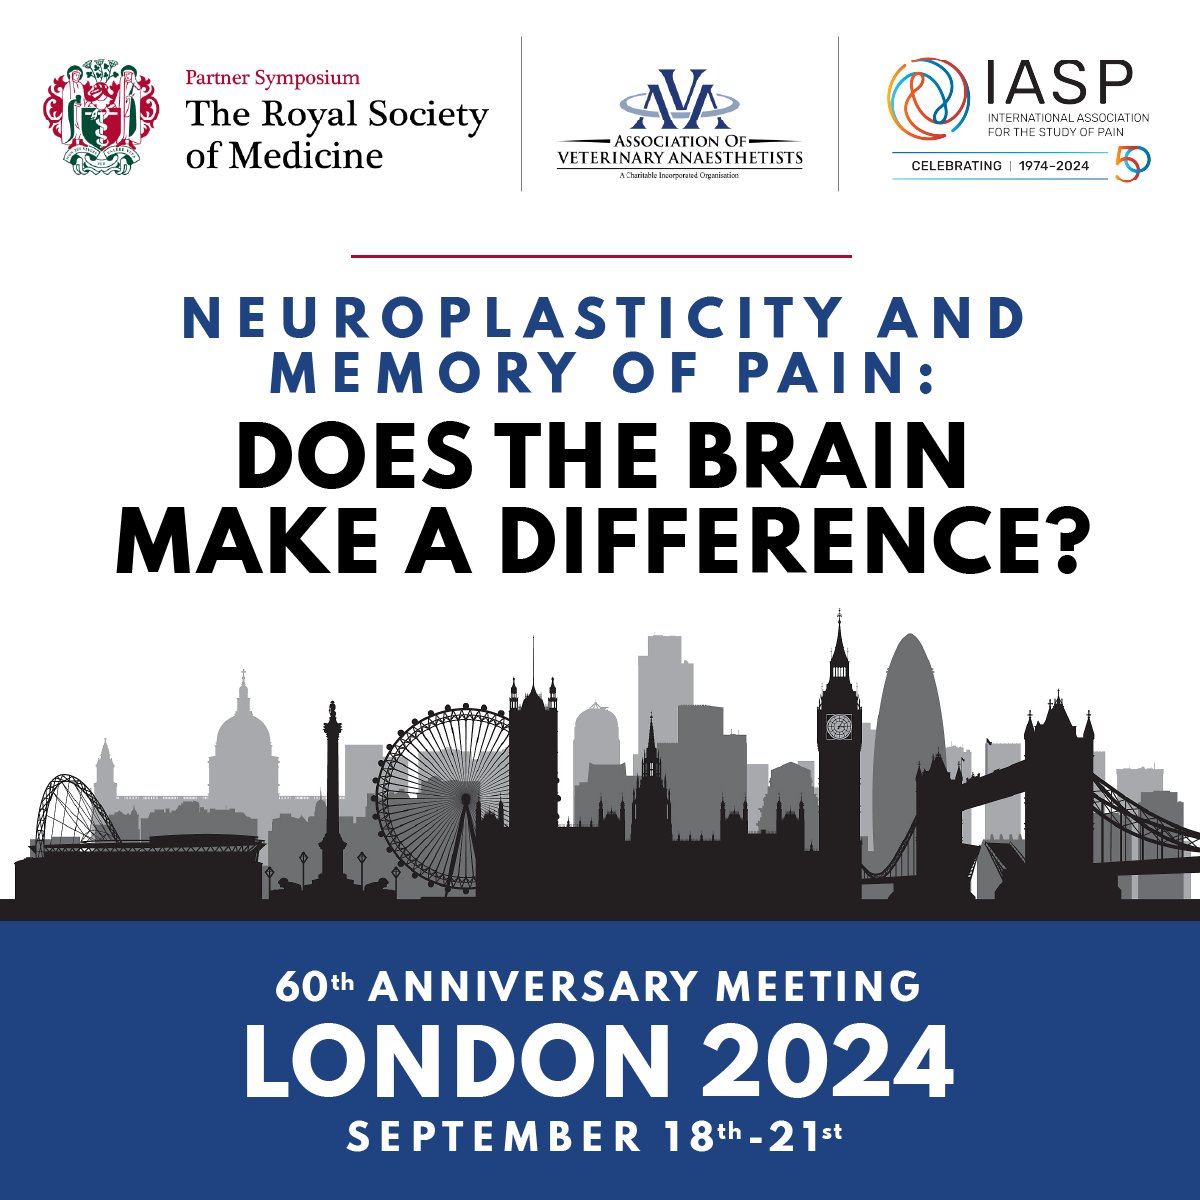 Present your research at the Non-Human Pain SIG Symposium during the AVA 60th Anniversary Meeting. Submit your abstracts by 30 June and contribute to discussions on neuroplasticity and memory of pain. Learn more: bit.ly/3UvuFI1